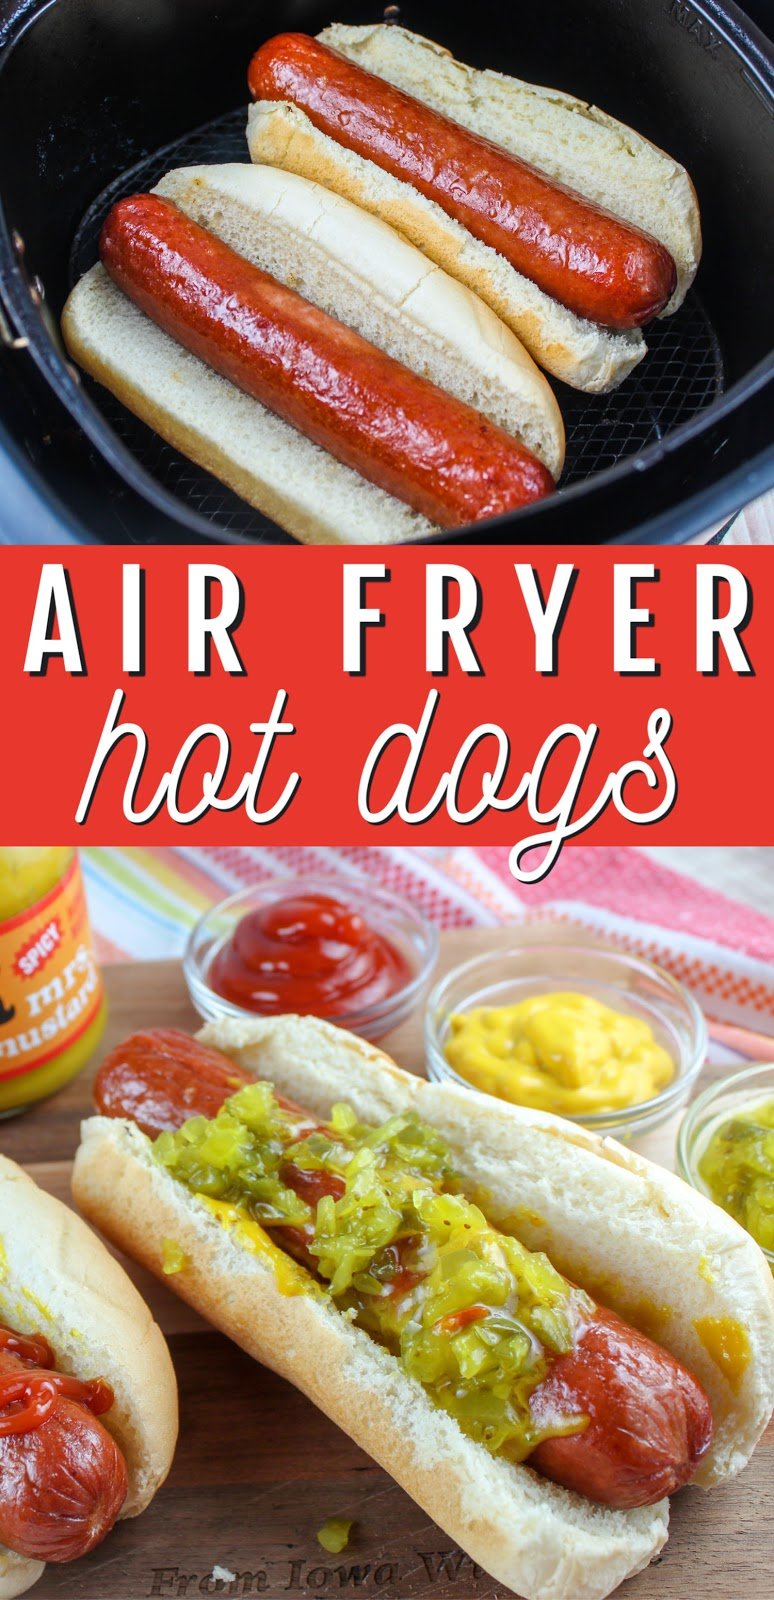 Hot Dogs in an air fryer are game changing! They’re cooked perfectly and taste like they’re meant to taste – juicy, meaty – so good! I’ll never make hot dogs another way!
 via @foodhussy